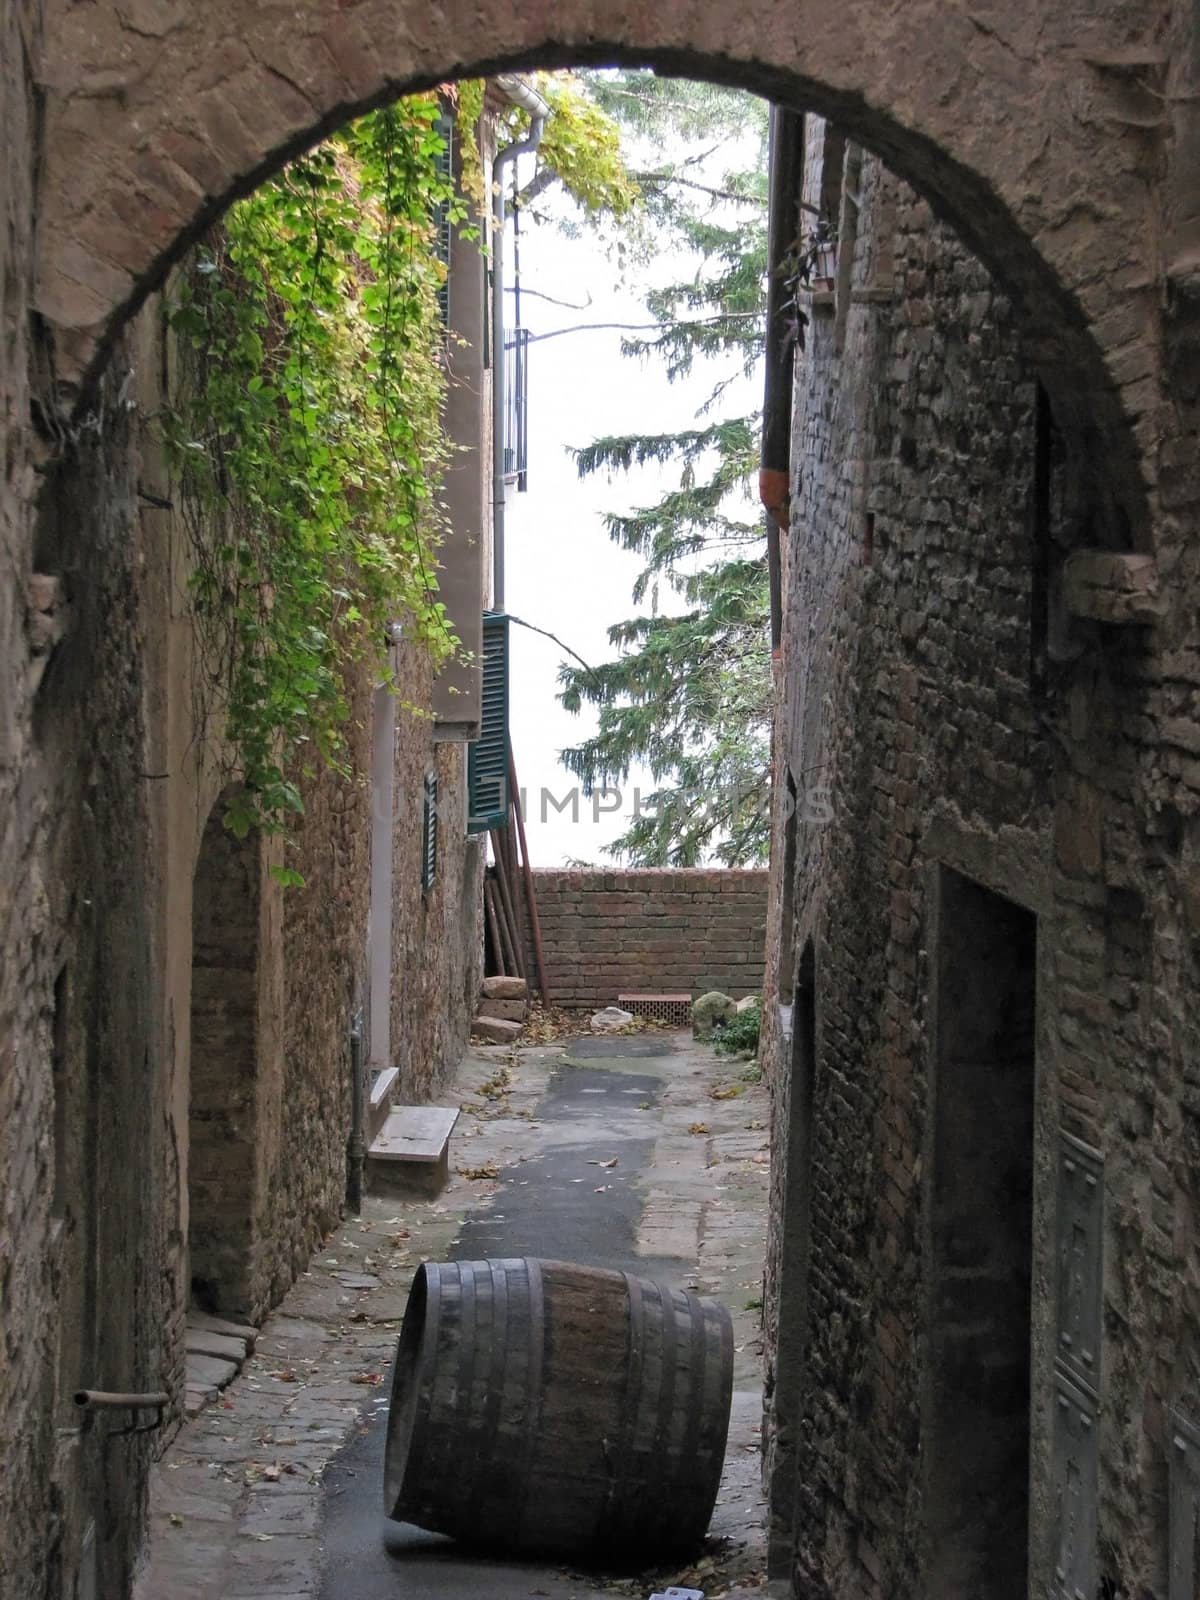 Alone wine barrel in an alley in Tuscany.